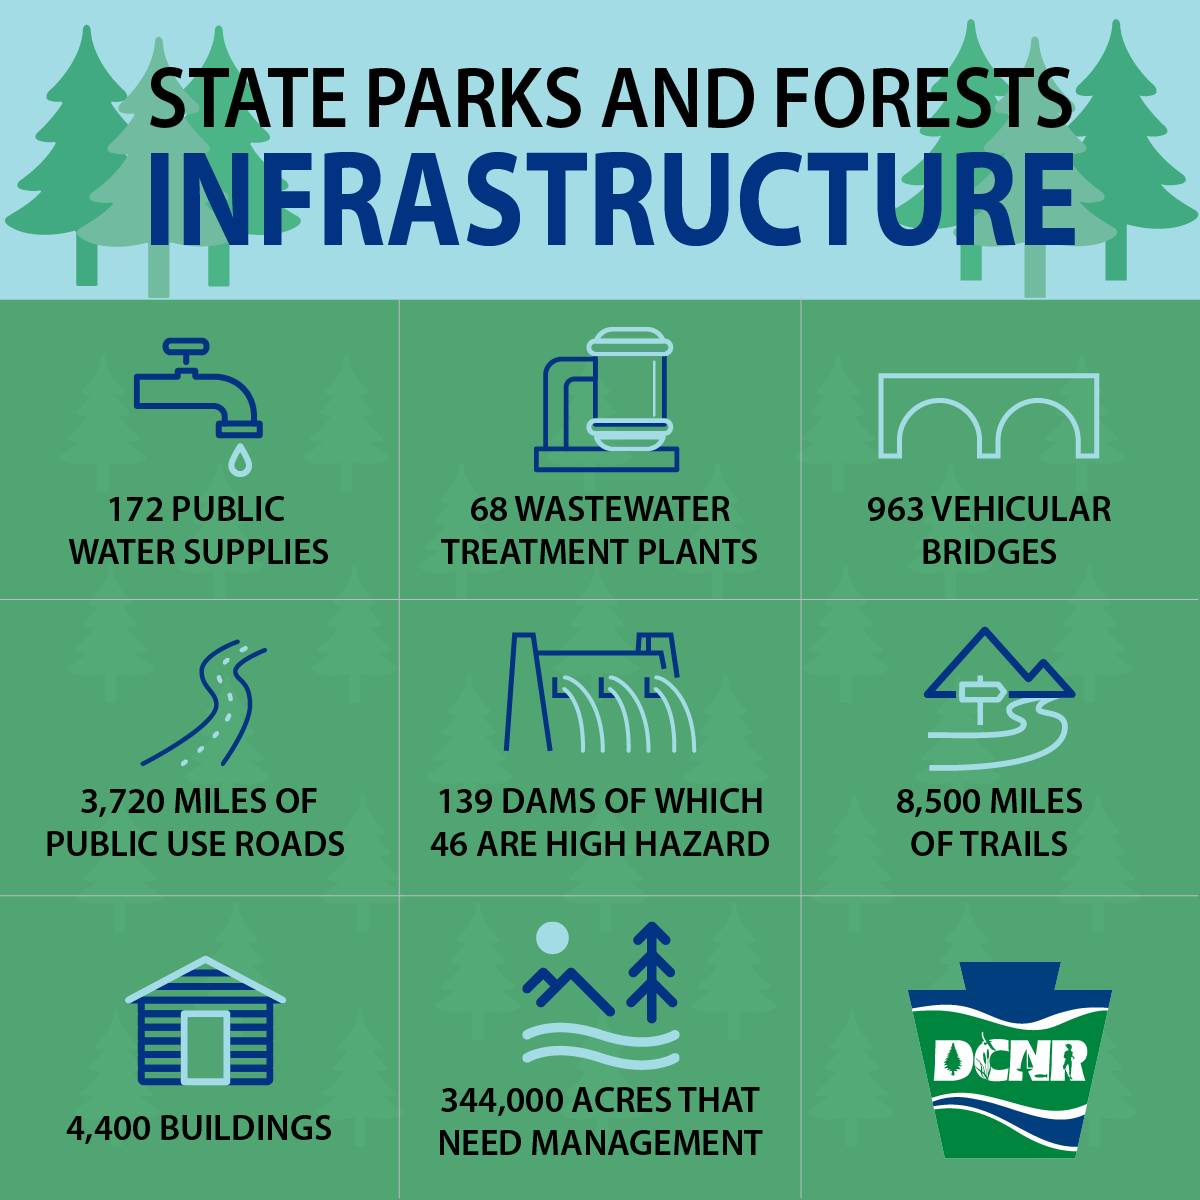 Infographic of state parks and forests infrastructure, including: 172 public water supplies, 68 wastewater treatment plants